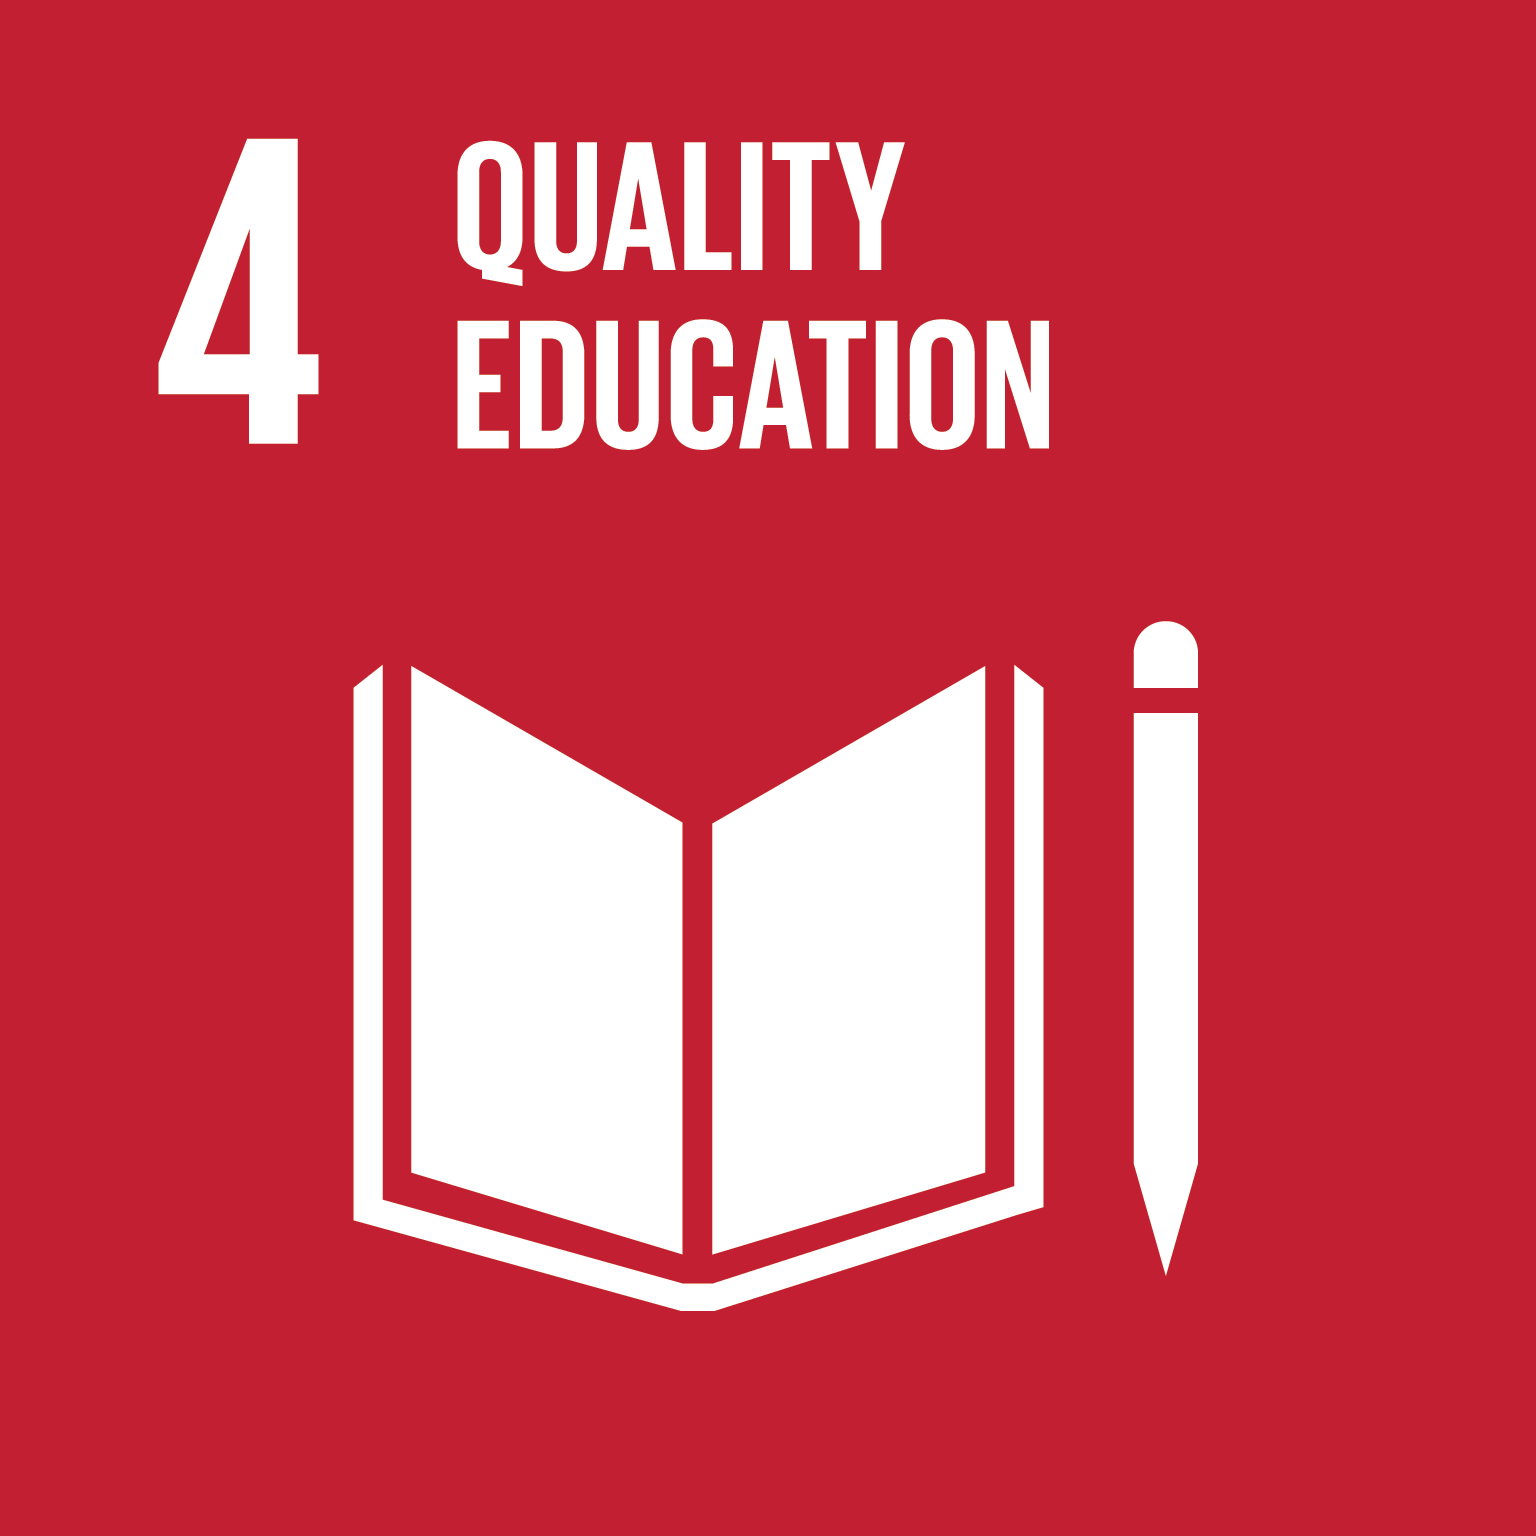 Goal 4: Quality Education - Ensure inclusive and equitable quality education and promote lifelong learning opportunities for all